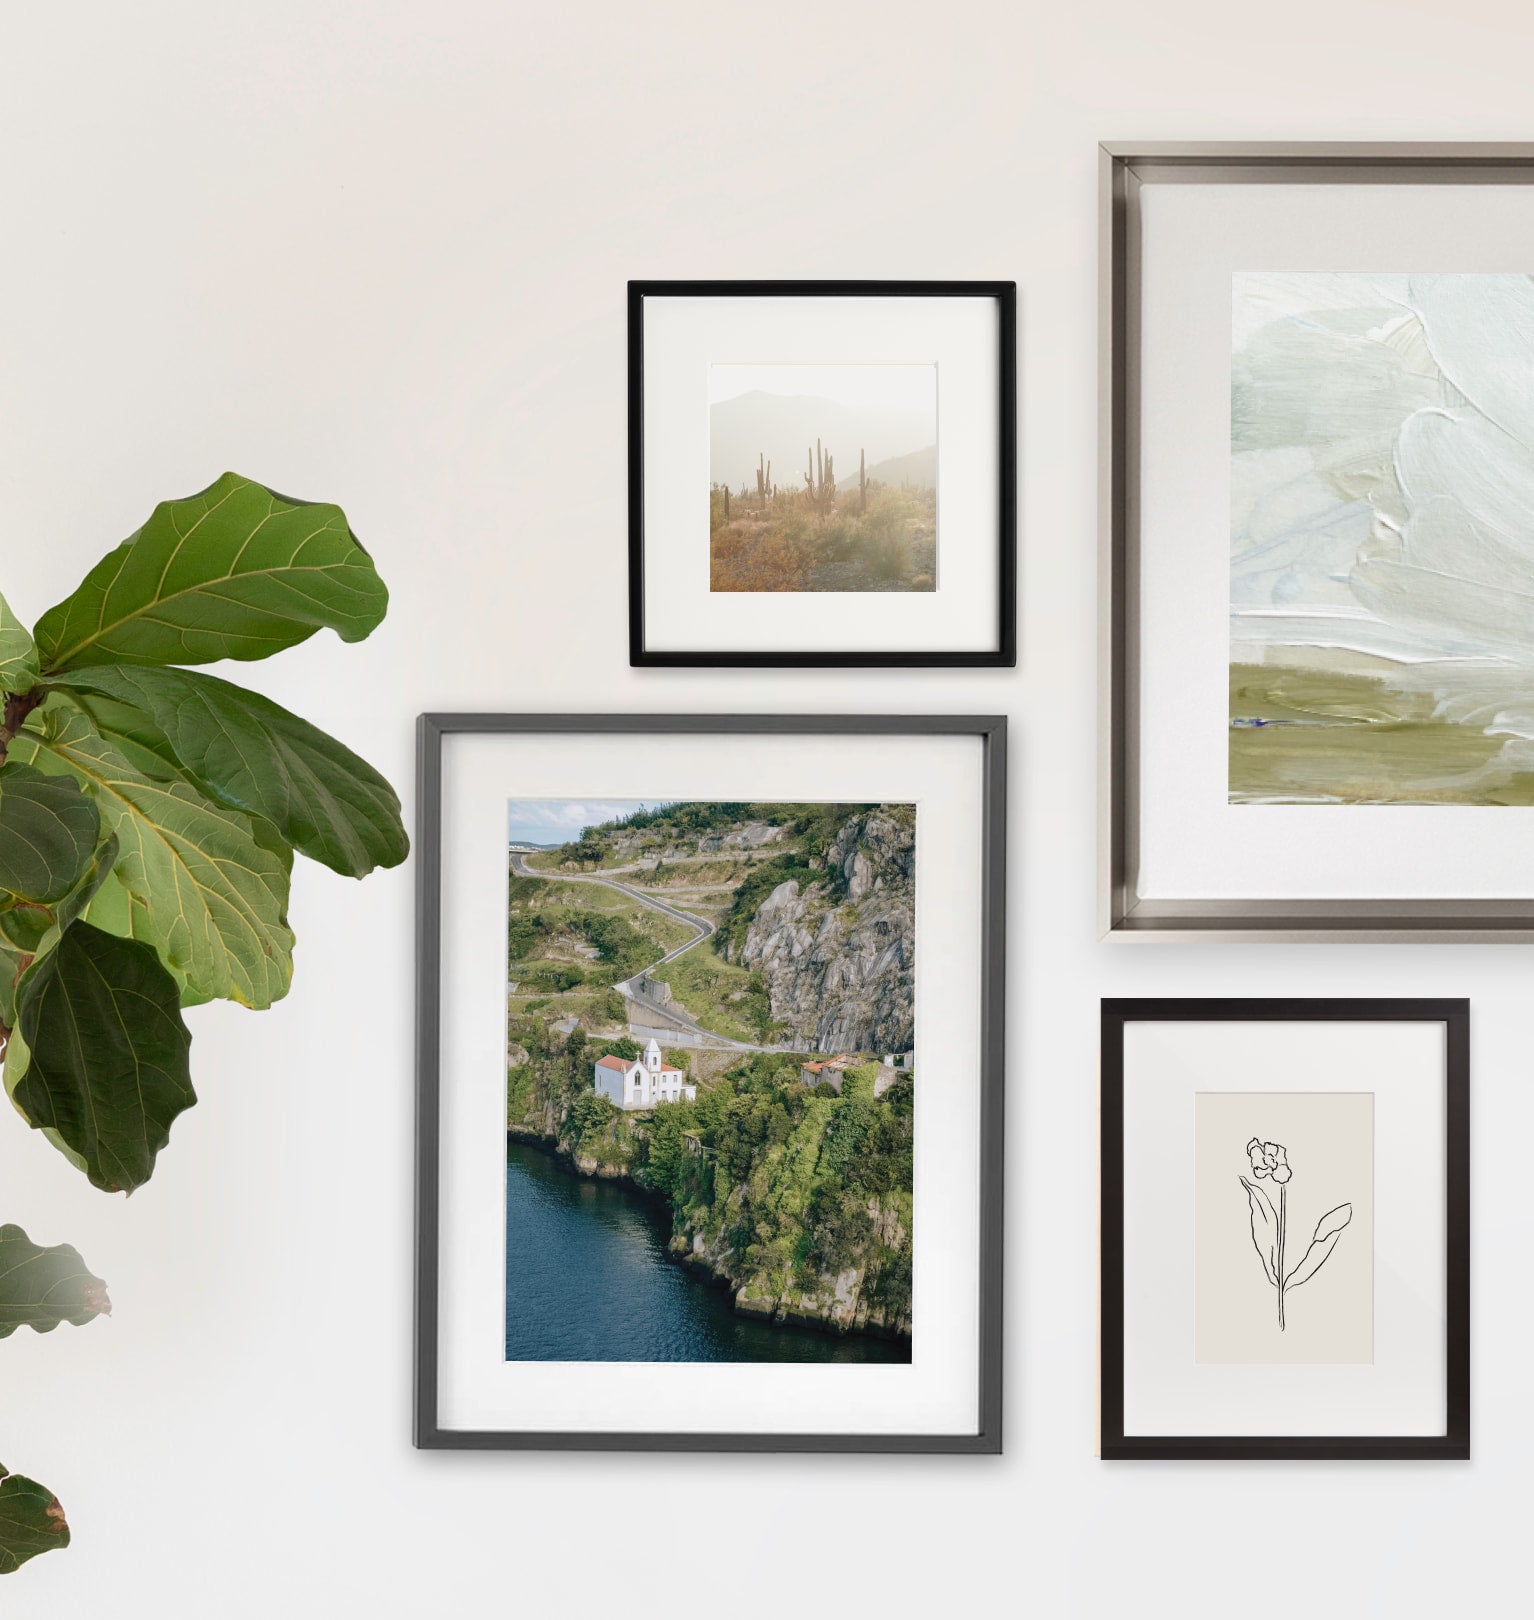 Four metal frame gallery wall with mix of landscape and art prints